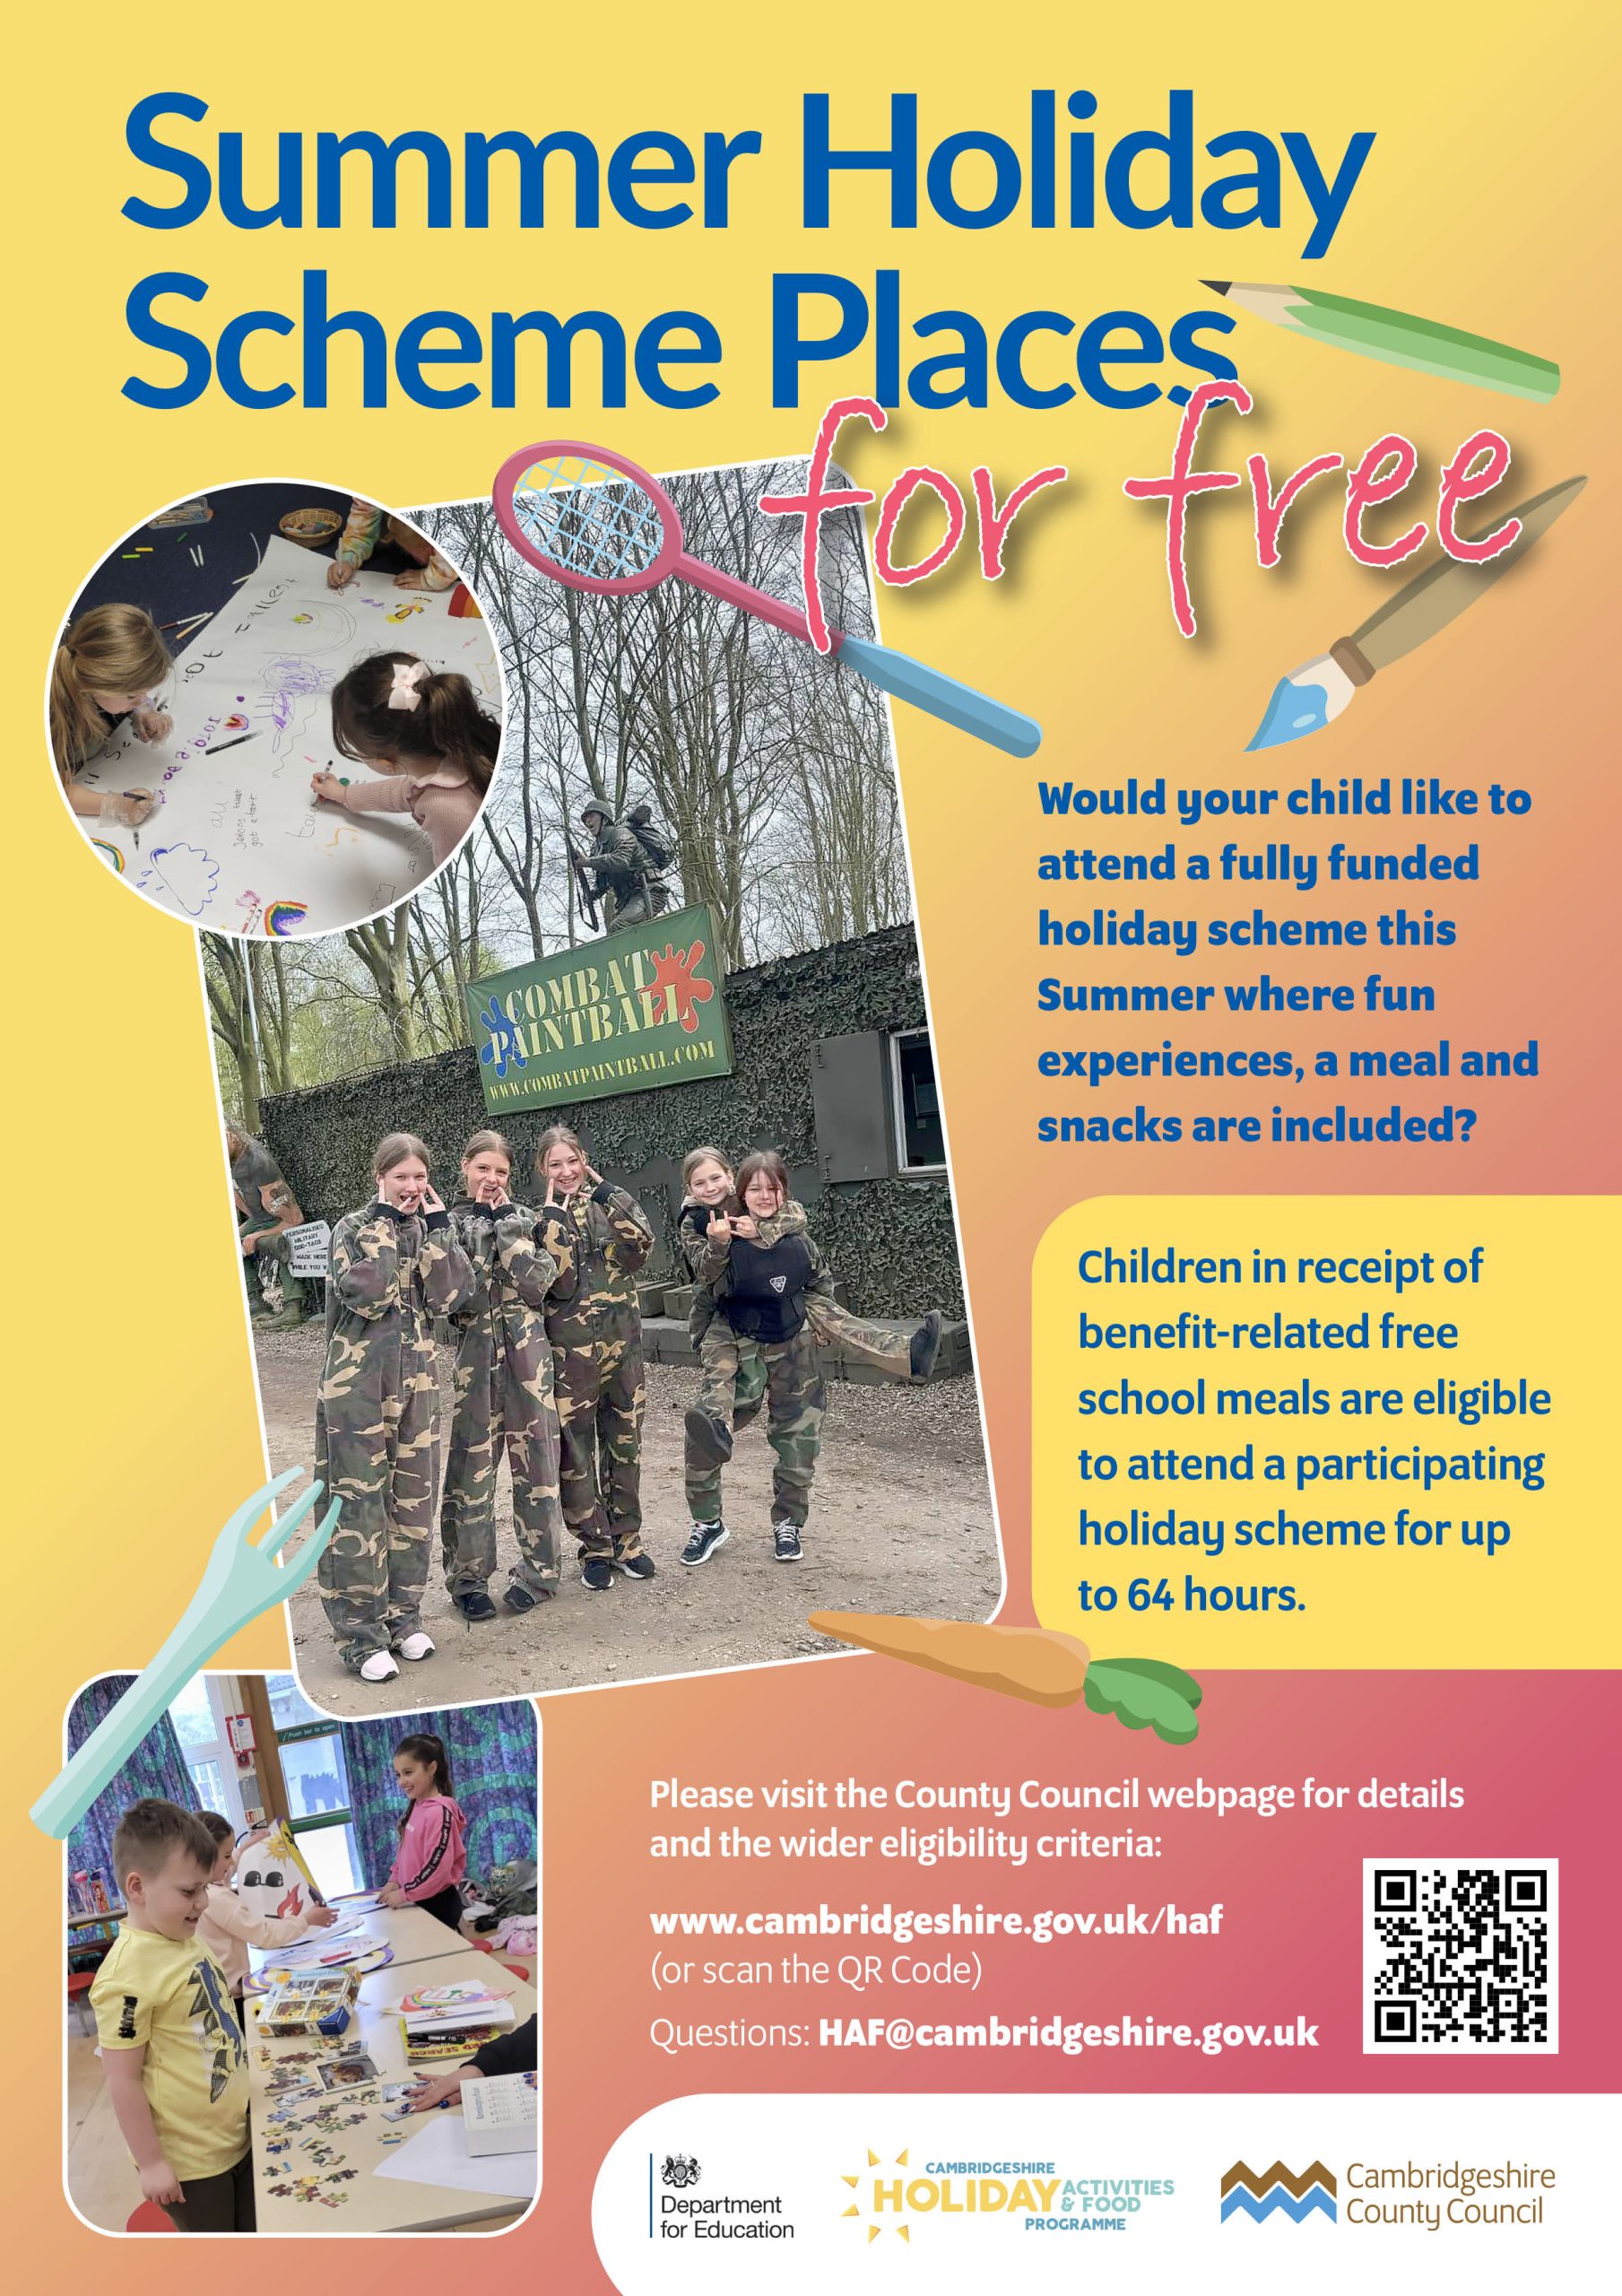 Summer Holiday Scheme places for free. Full details in the body of text. 